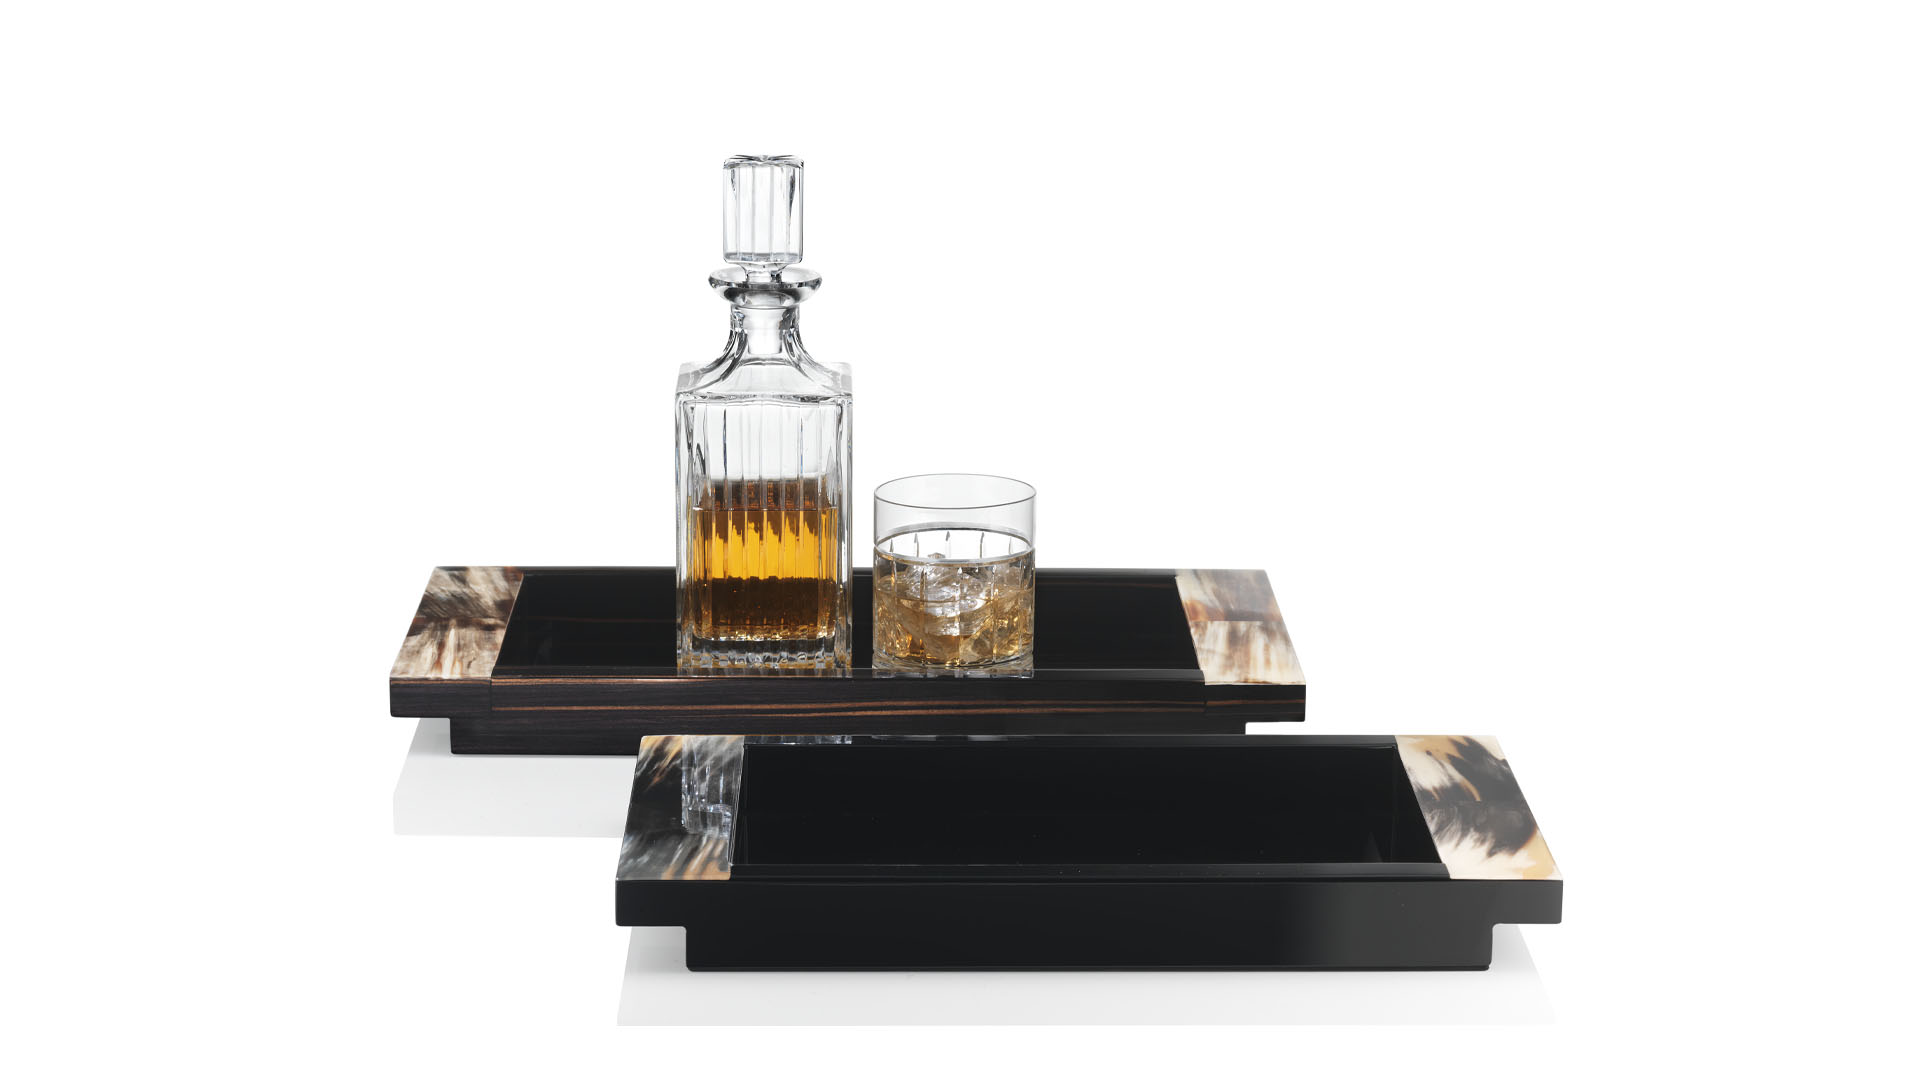 Tableware - Elia tray in horn and glossy ebony or black lacquer - cover - Arcahorn